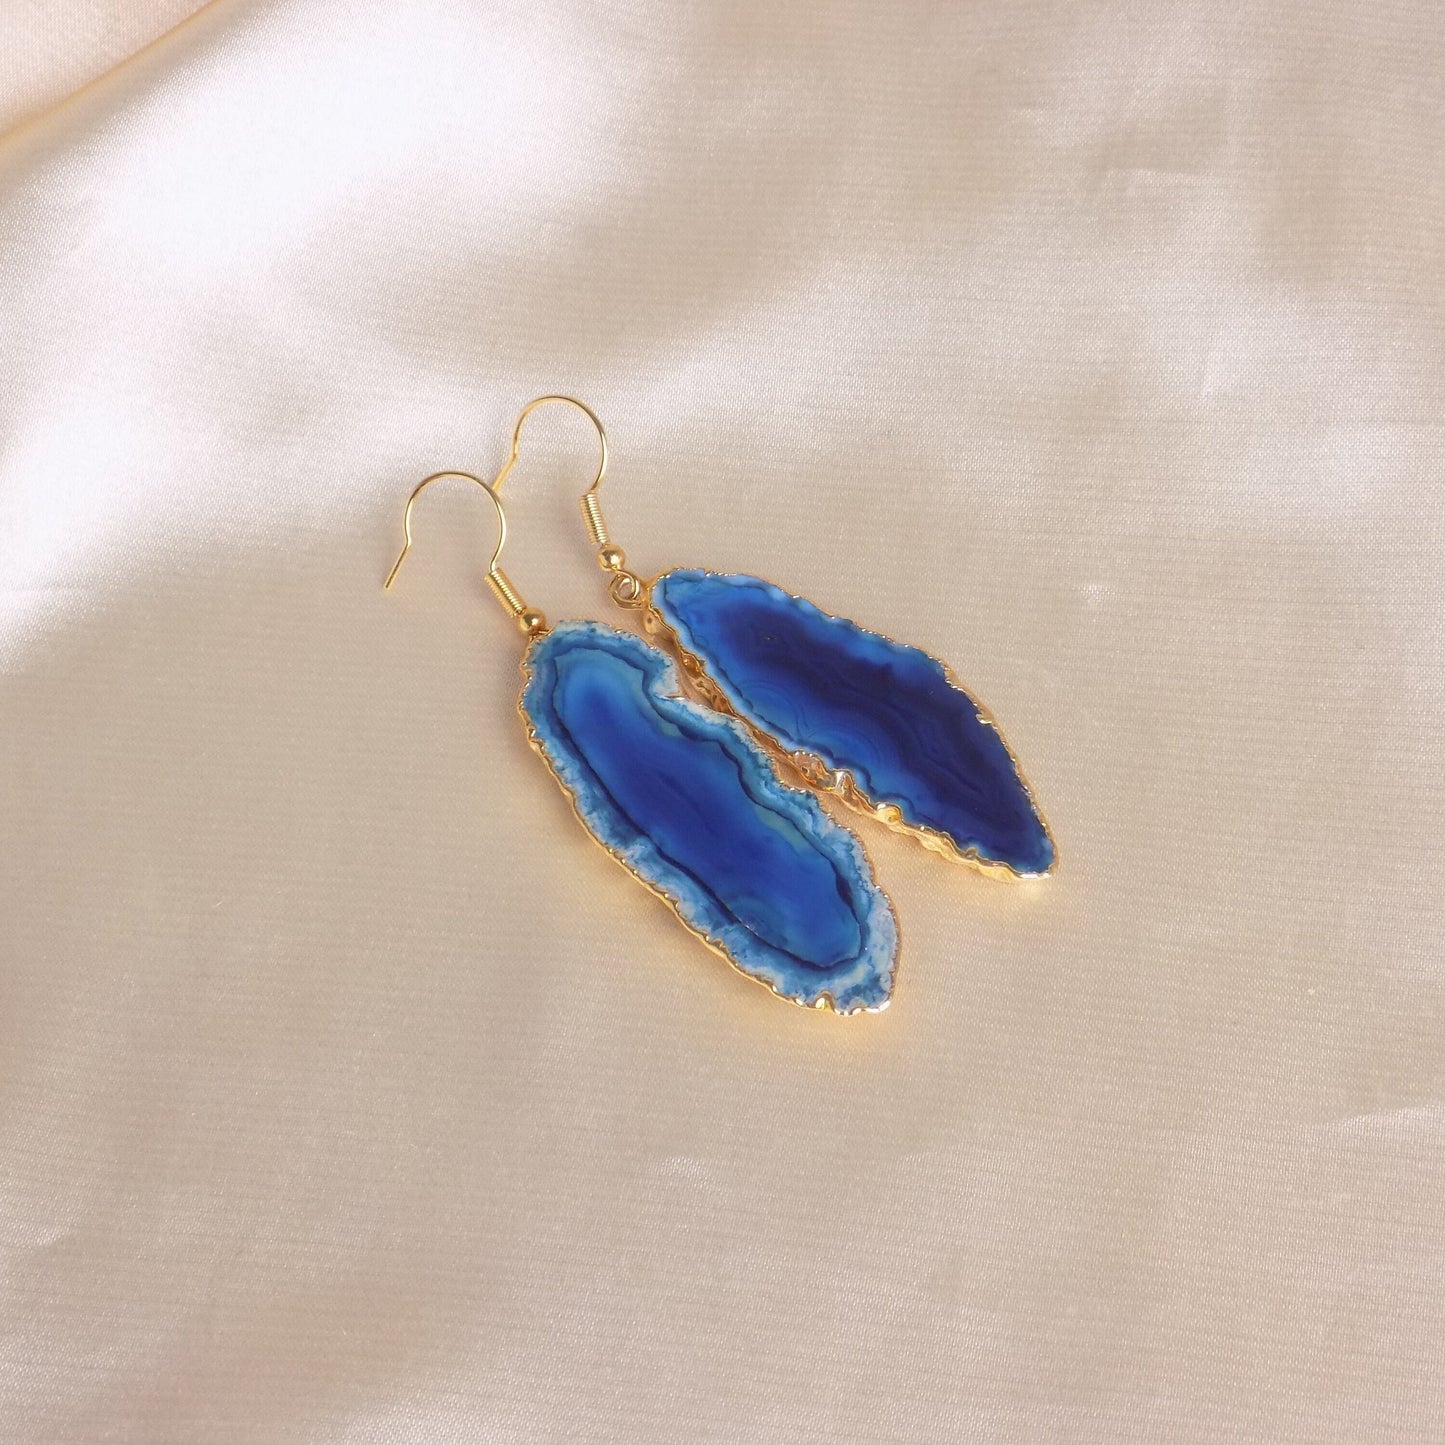 Gifts For Her, Unique Agate Earrings Gold, Blue Statement Earring, Bridesmaid Gift, G15-160